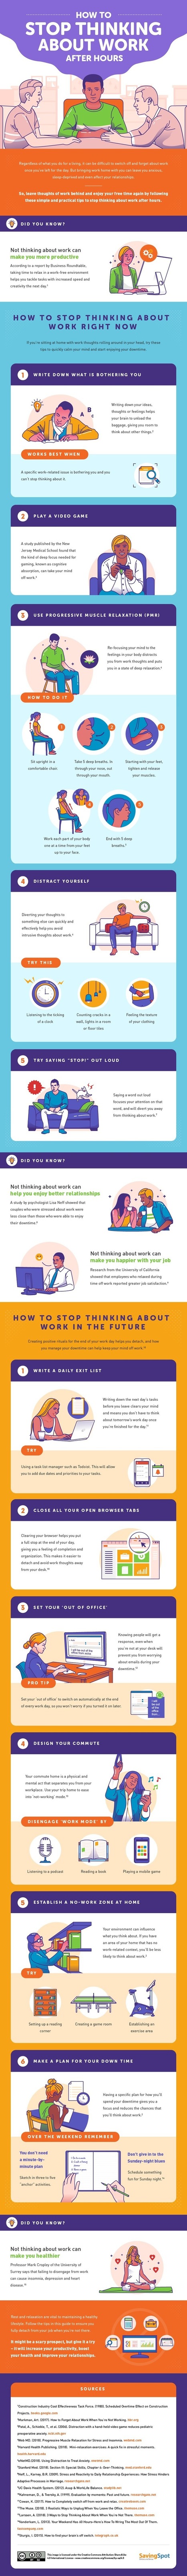 How to switch off your work brain after hours (infographic) via @digitaliworld | iGeneration - 21st Century Education (Pedagogy & Digital Innovation) | Scoop.it